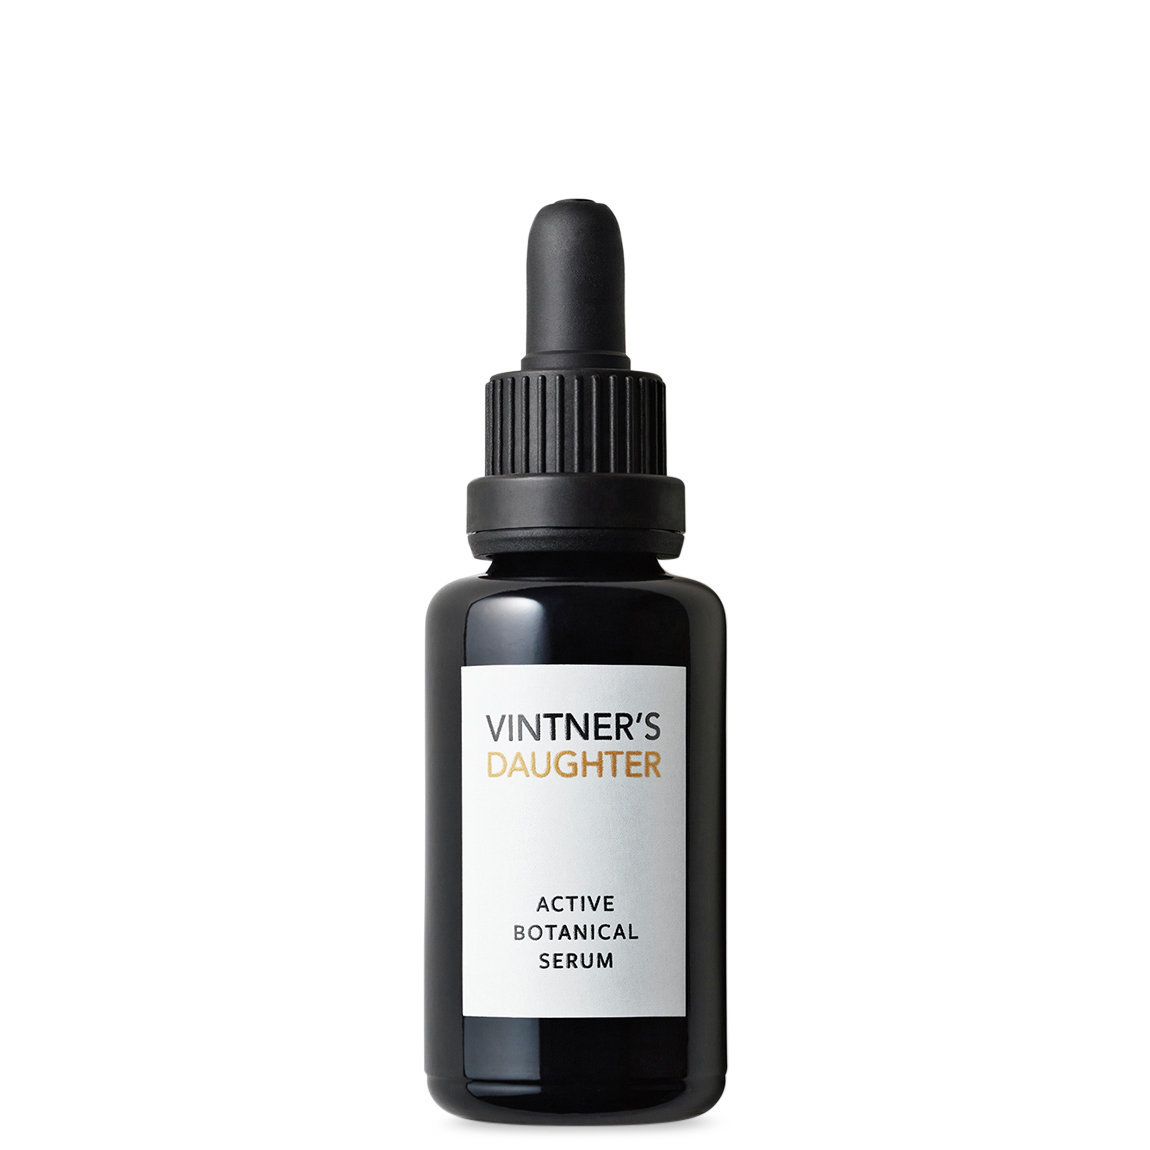 Vintner's Daughter Active Botanical Serum alternative view 1 - product swatch.